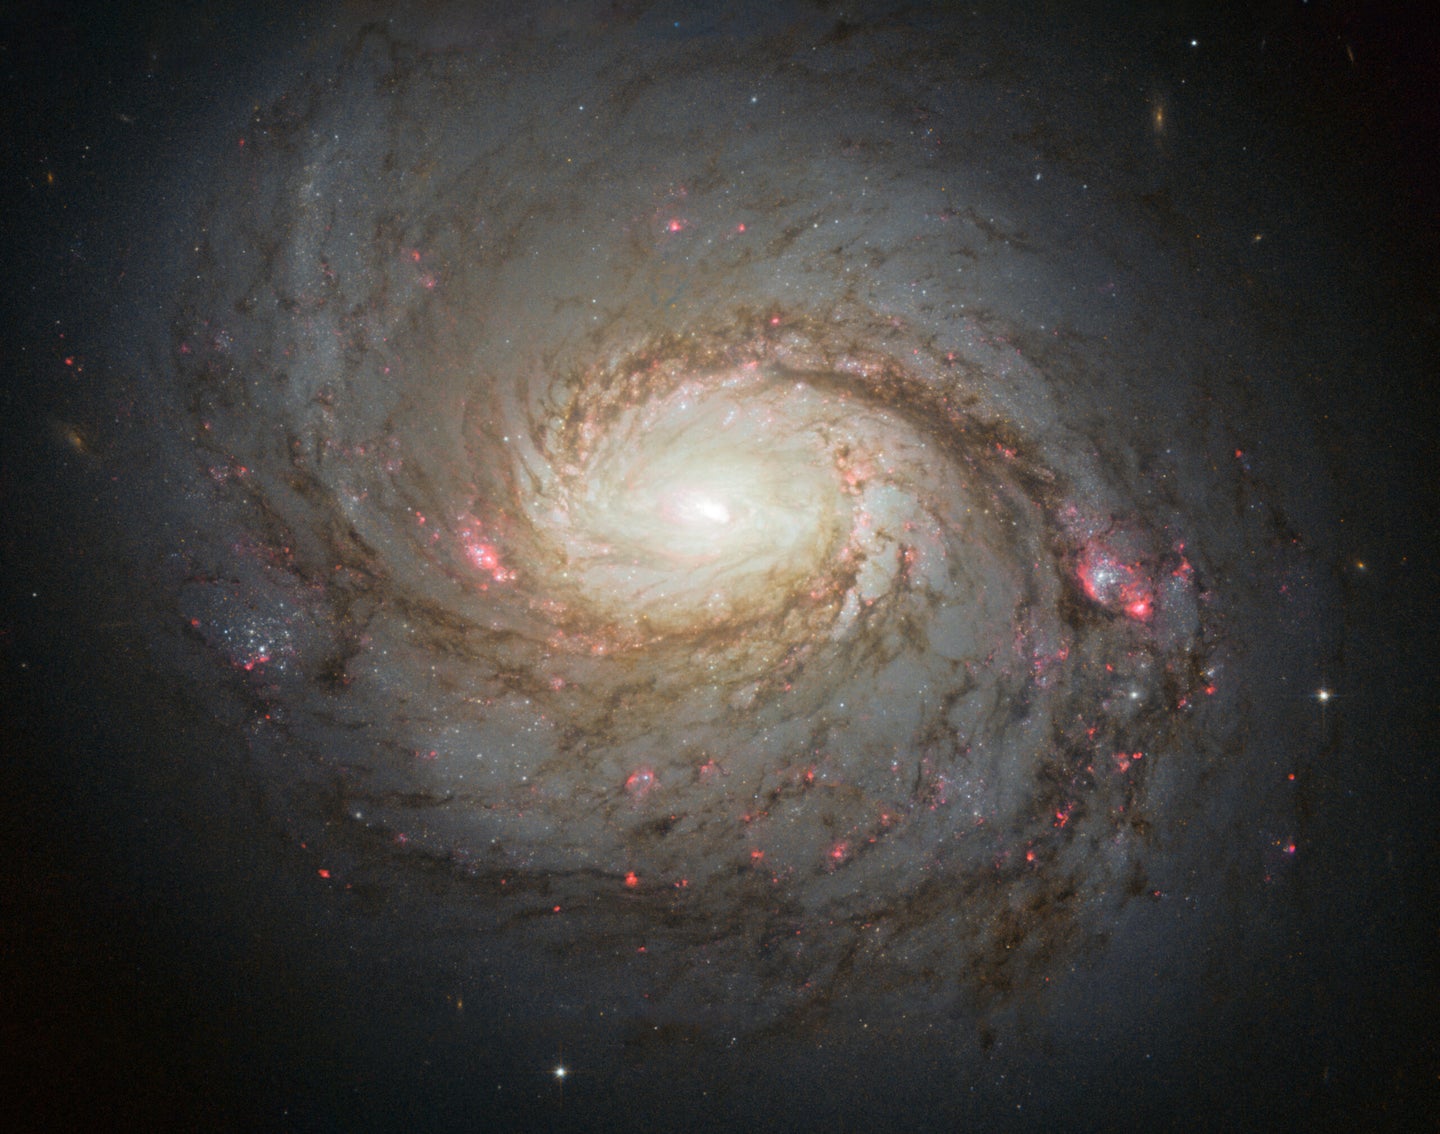 The center of Messier 77's spiral galaxy.